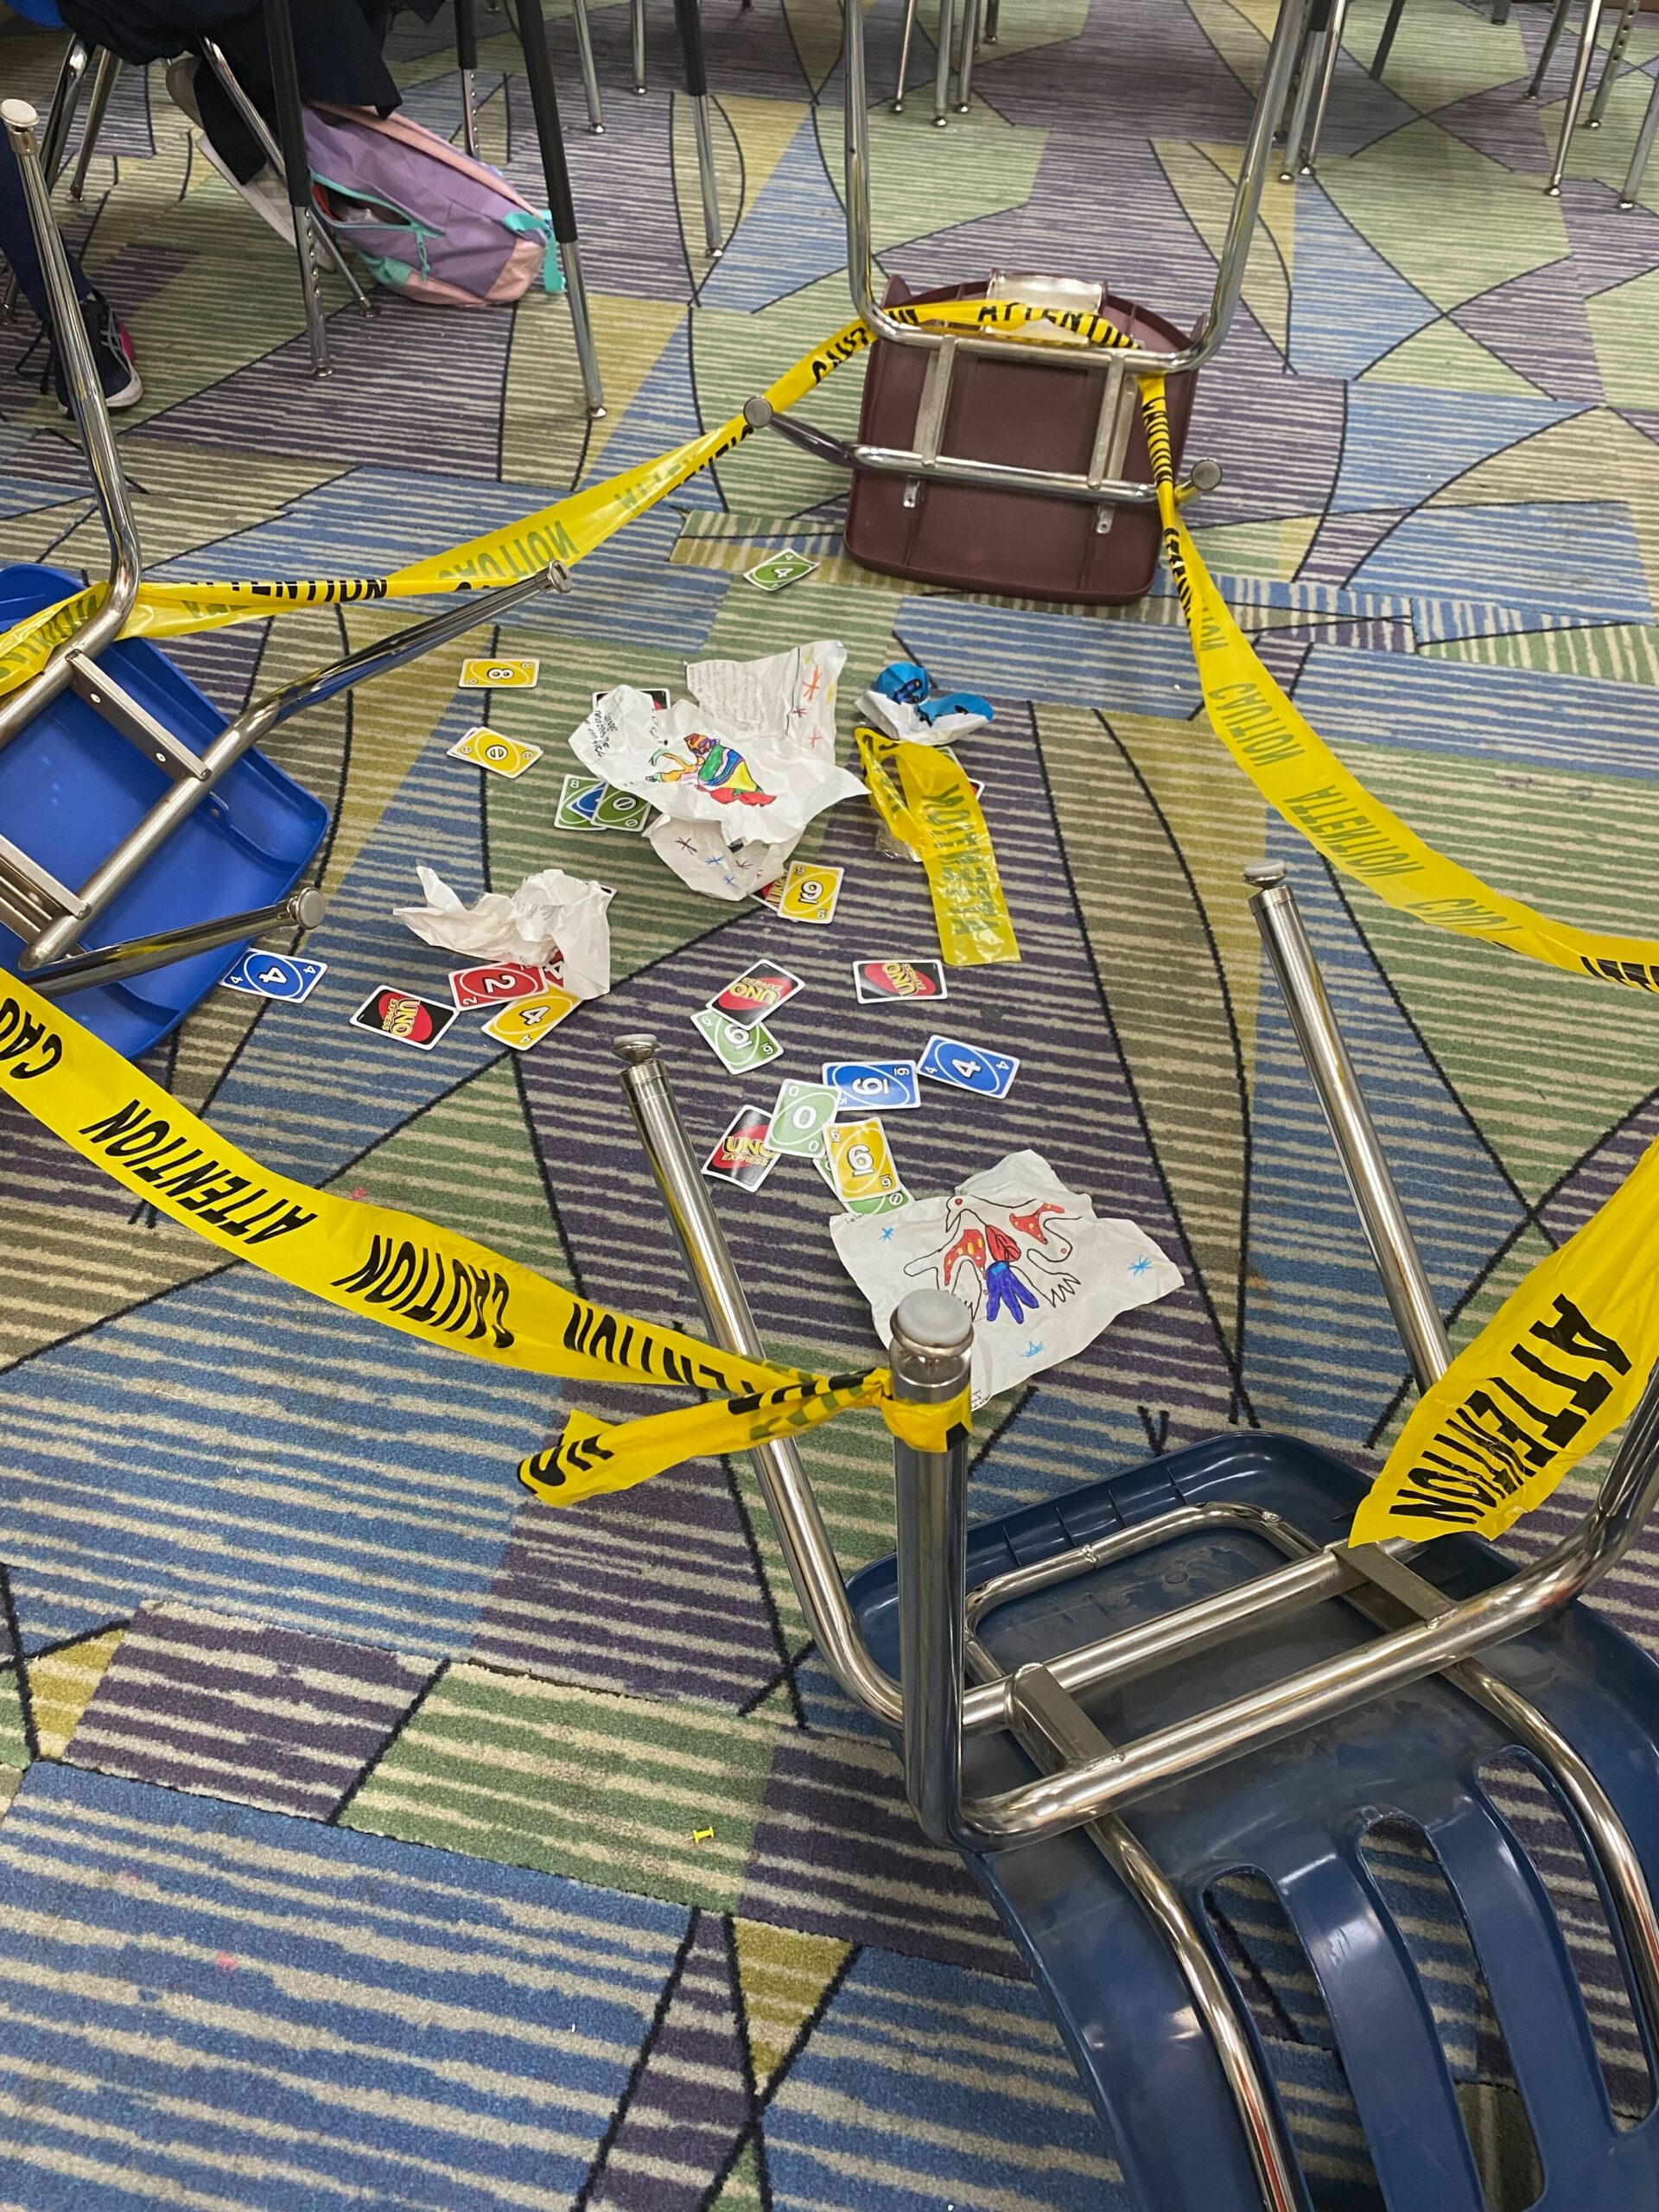 Crime Scene with Fractions